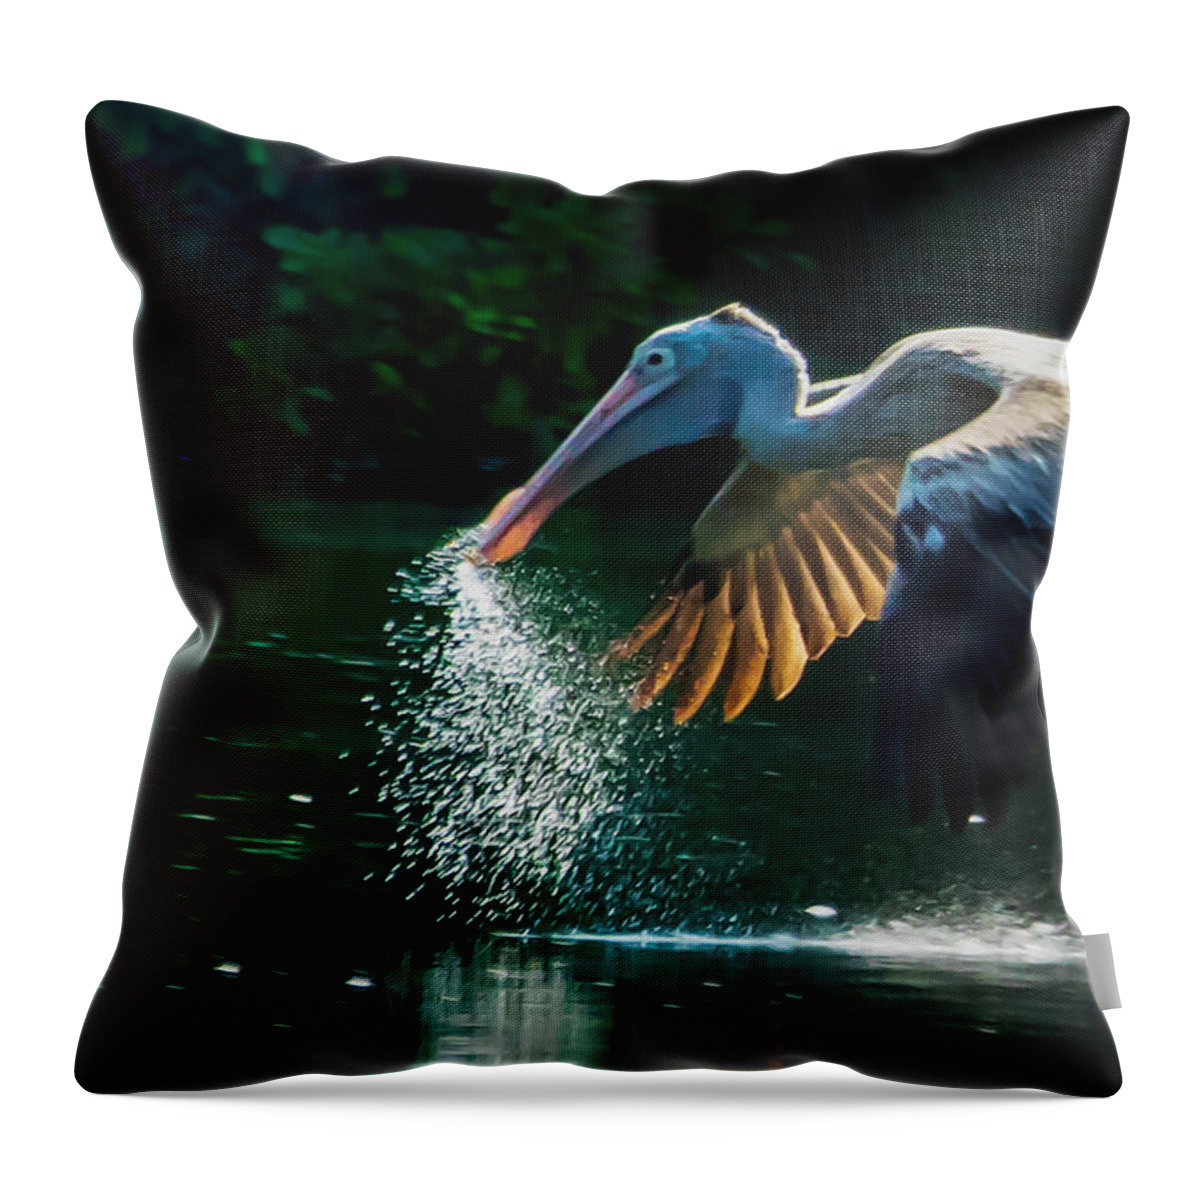 Pelican Throw Pillow featuring the photograph The Big Scoop by Ramabhadran Thirupattur